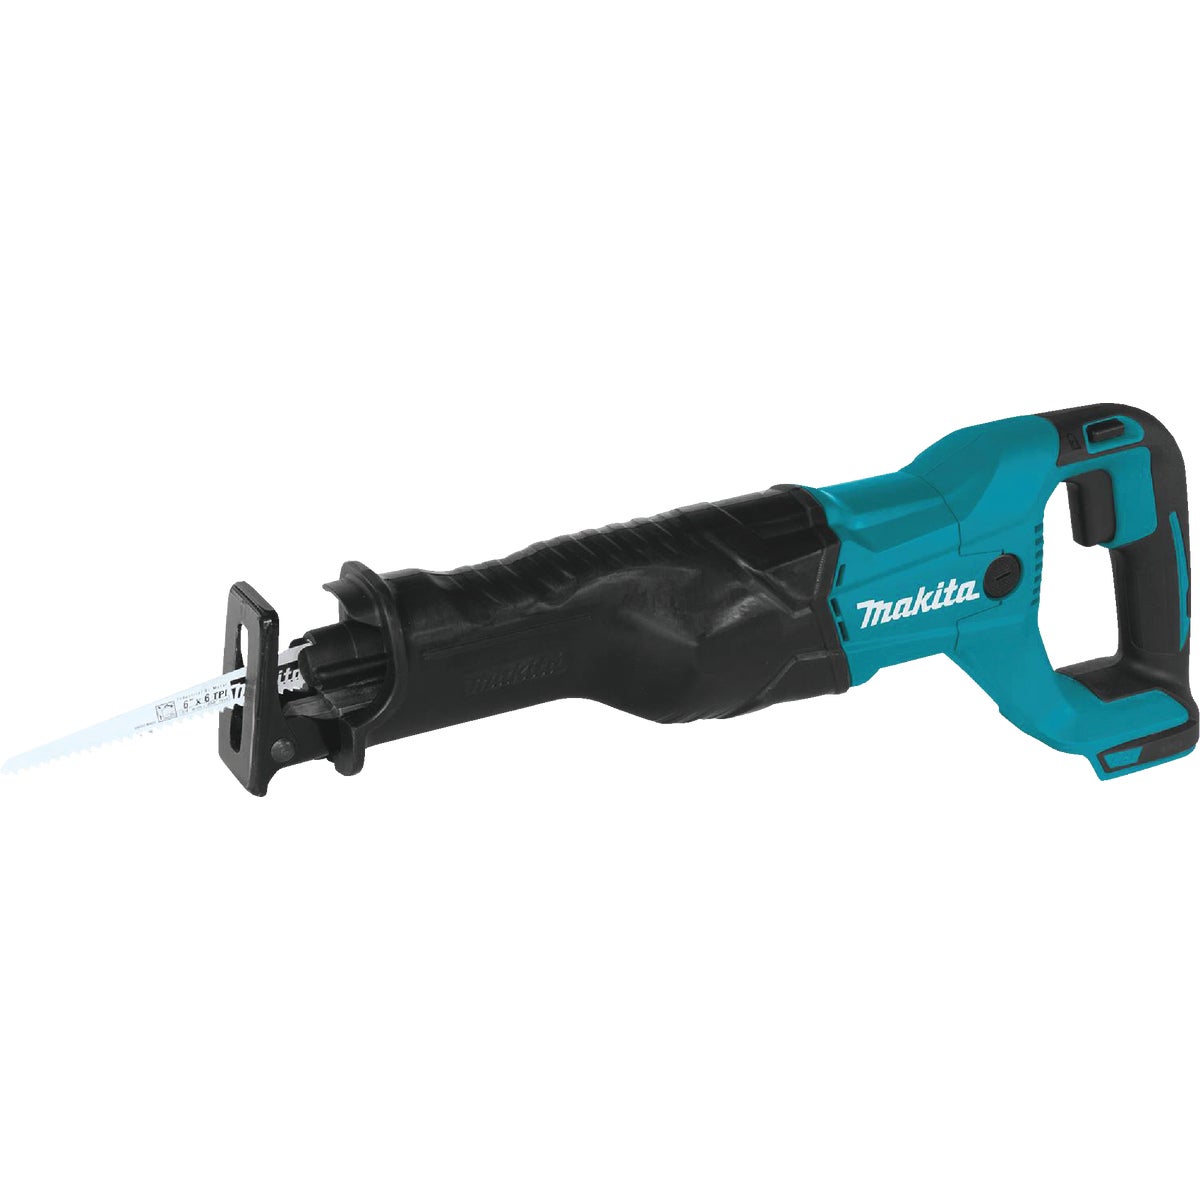 Makita 18 Volt LXT Lithium-Ion Cordless Reciprocating Saw (Tool Only)